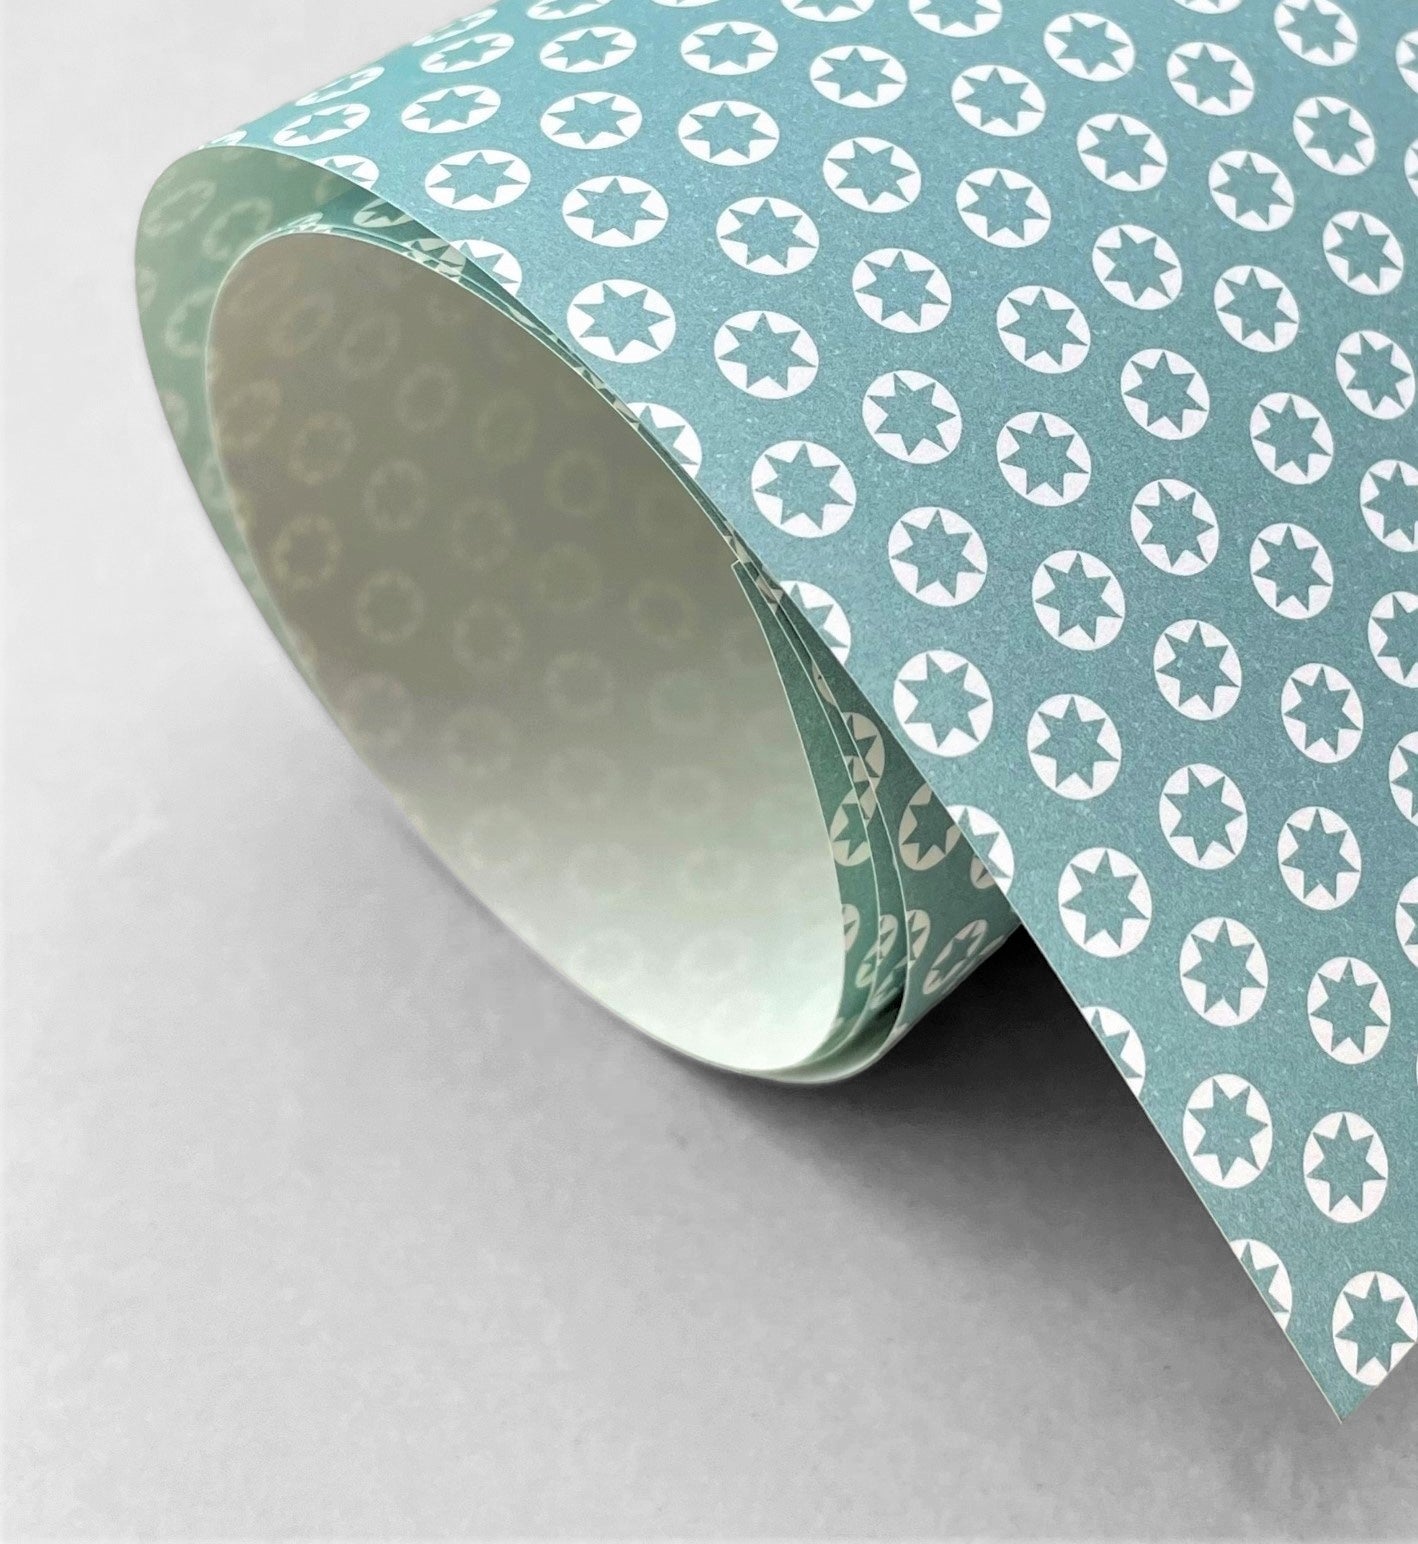 wrapping paper with an abstract tiny stars pattern in ice blue and white by Ola Studio